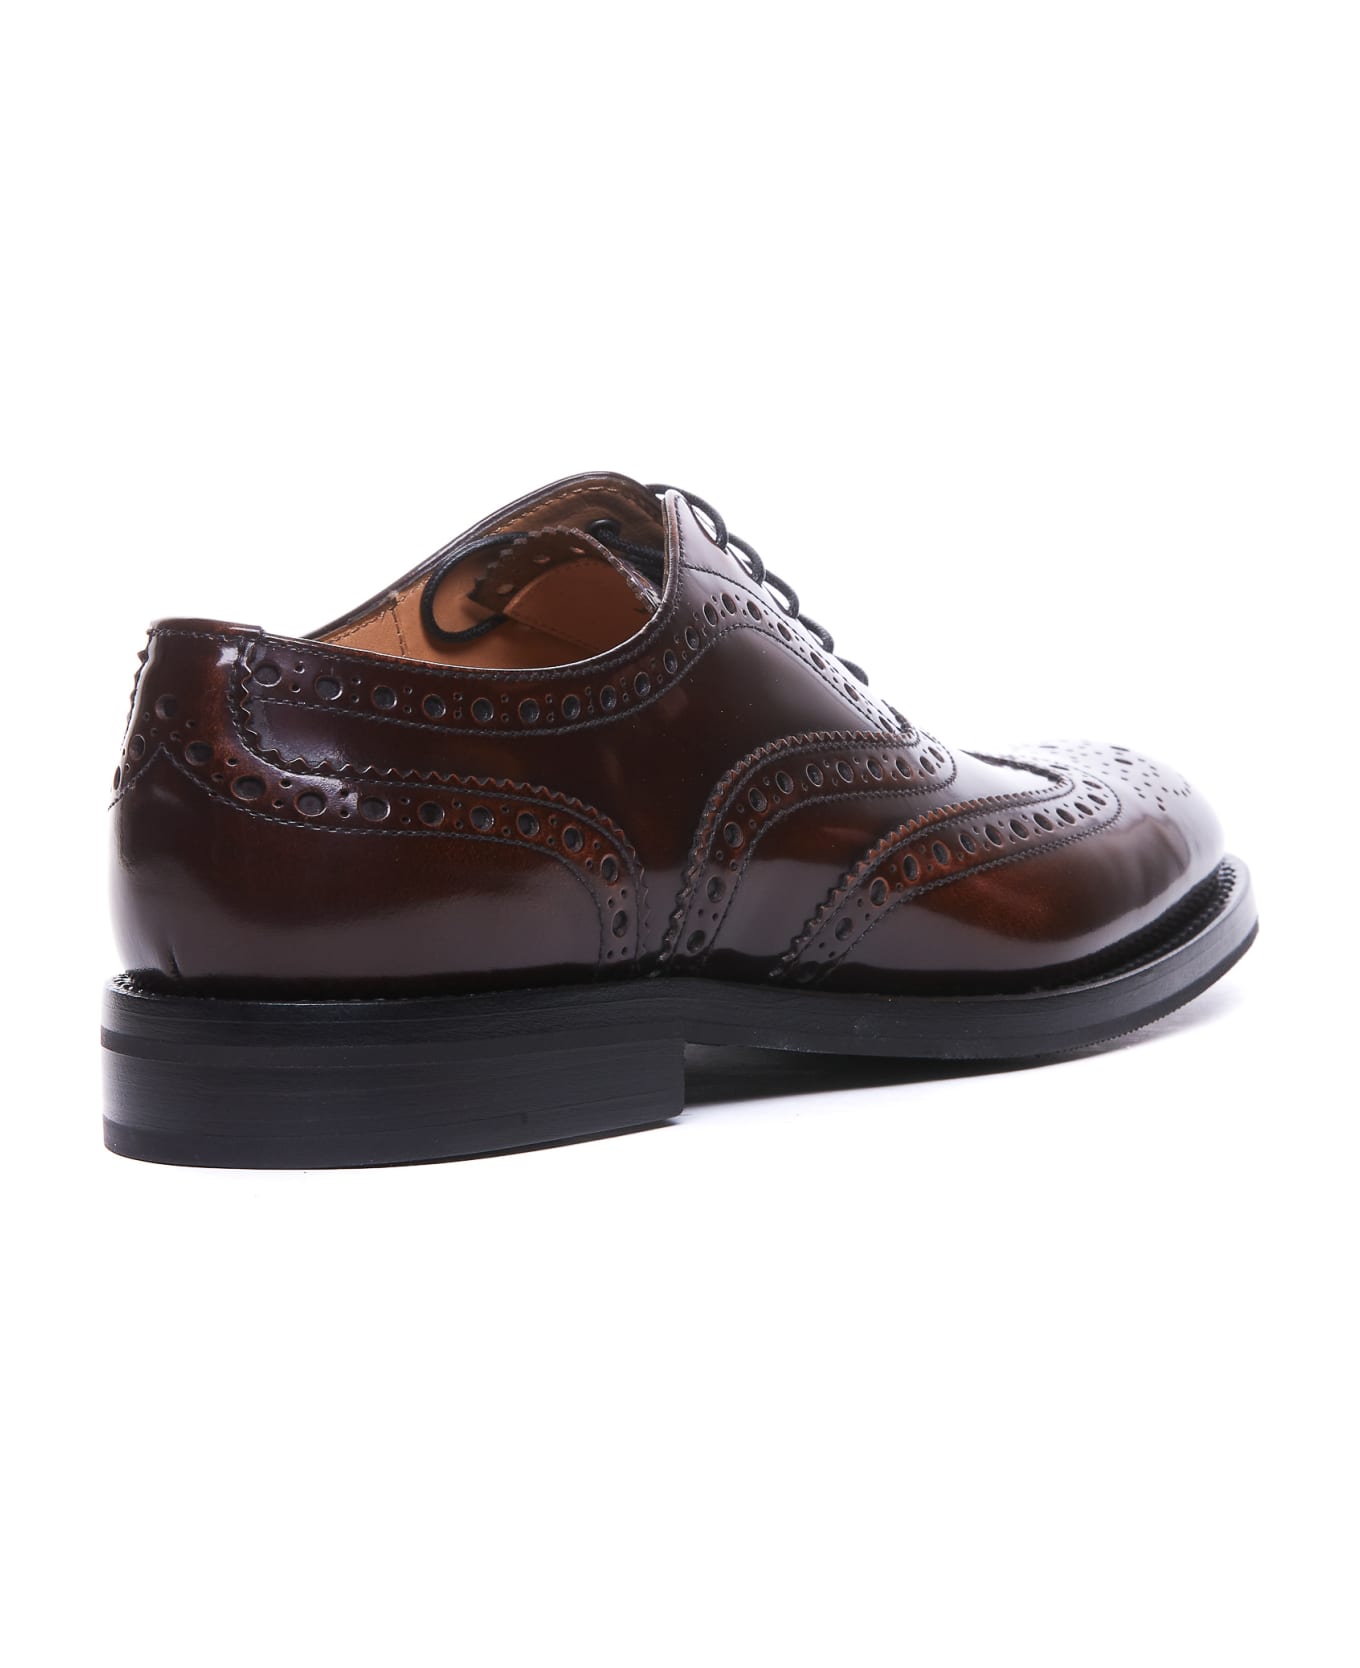 Church's Lace Up Shoes - Brown フラットシューズ